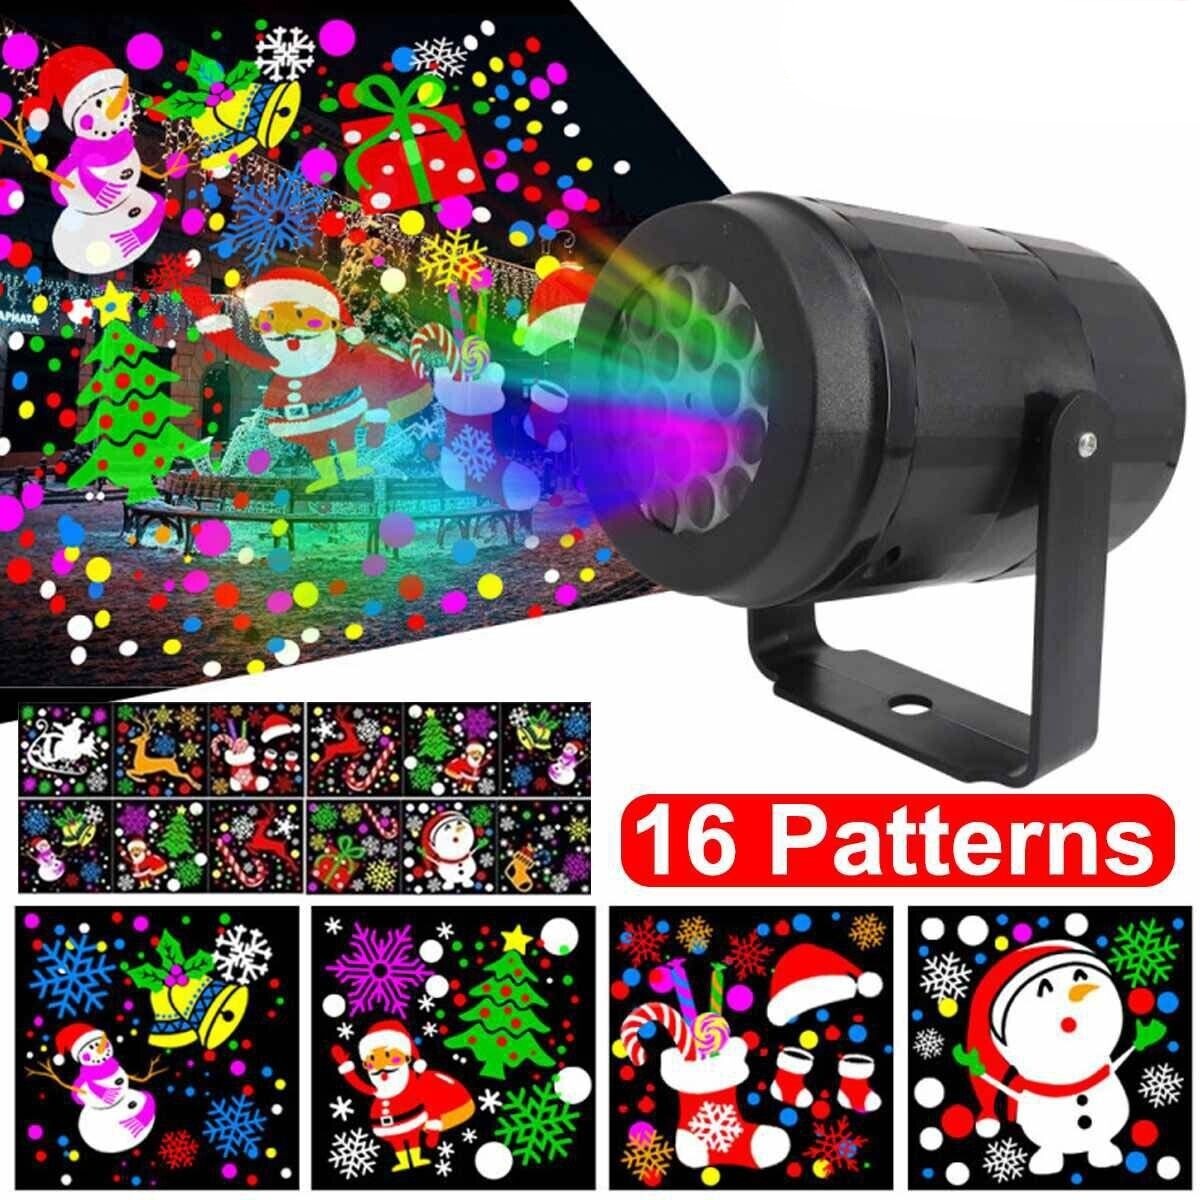 Christmas Projector Lights Outdoor Indoor Party LED Projection Laser Lamp Decor